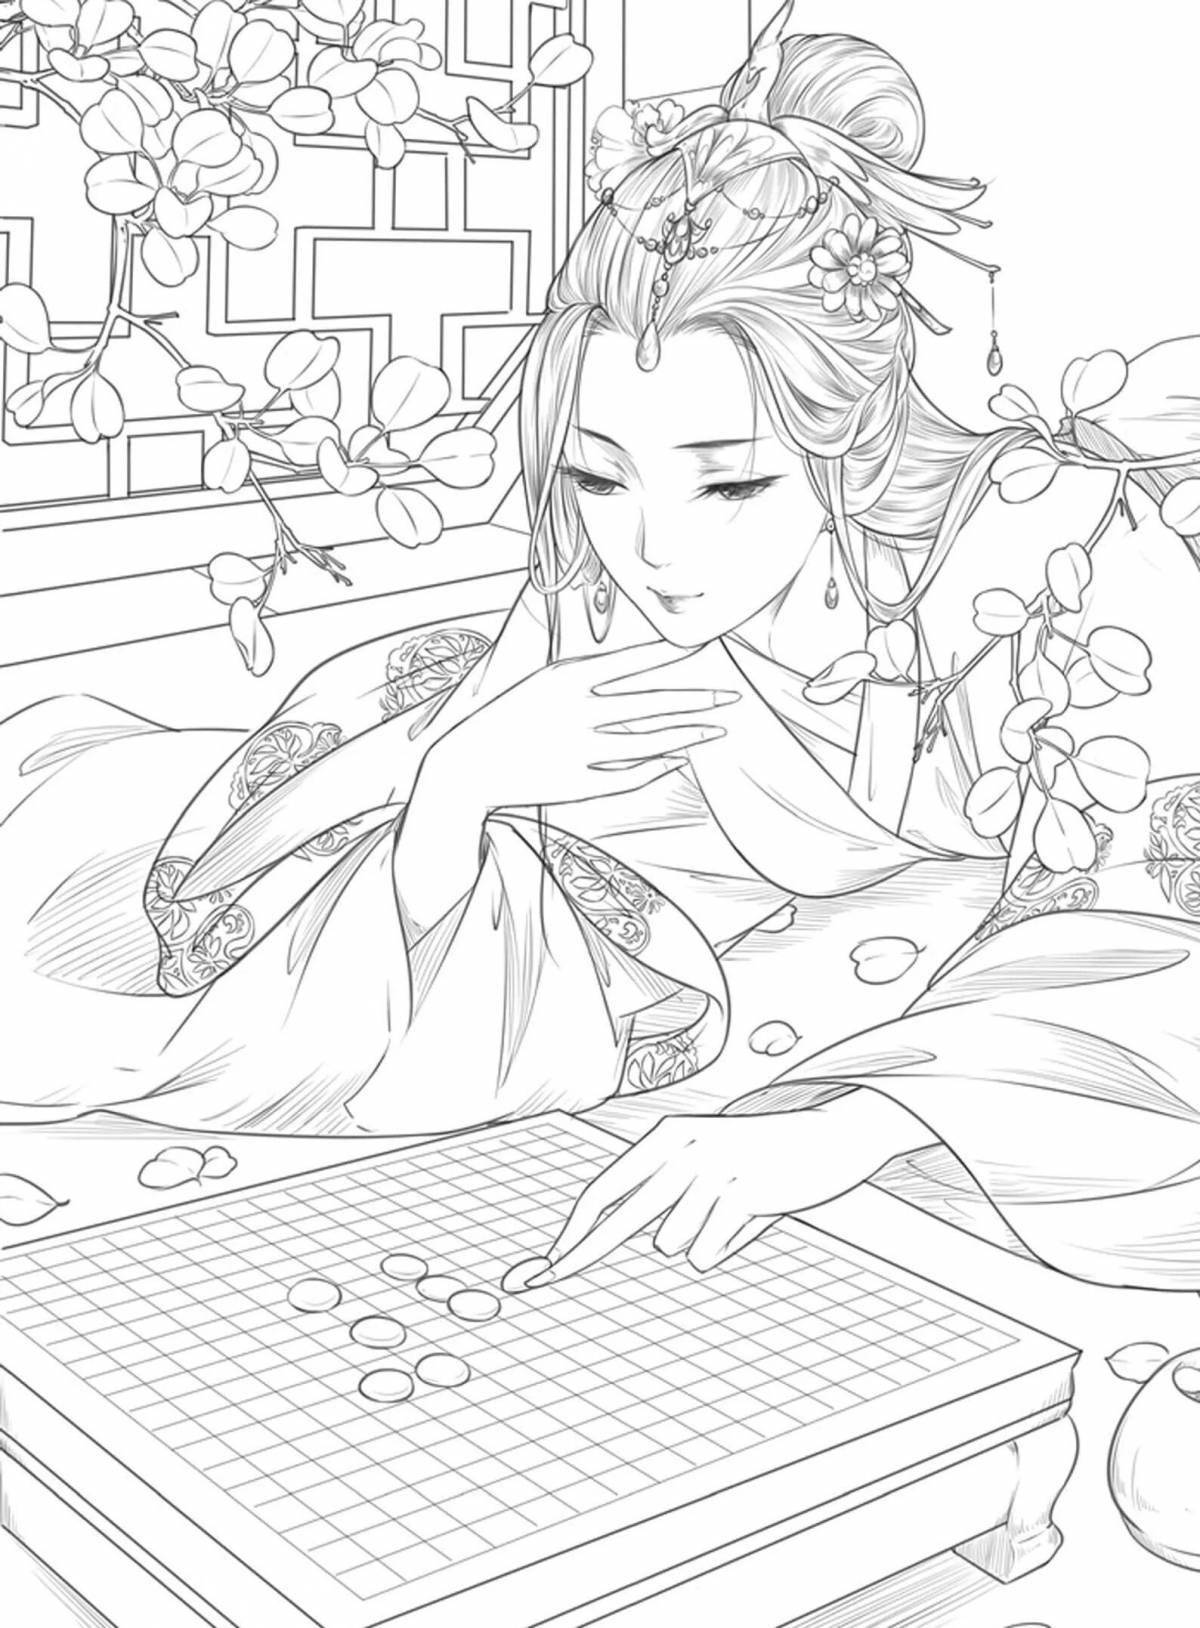 Adorable anime style anti-stress coloring book